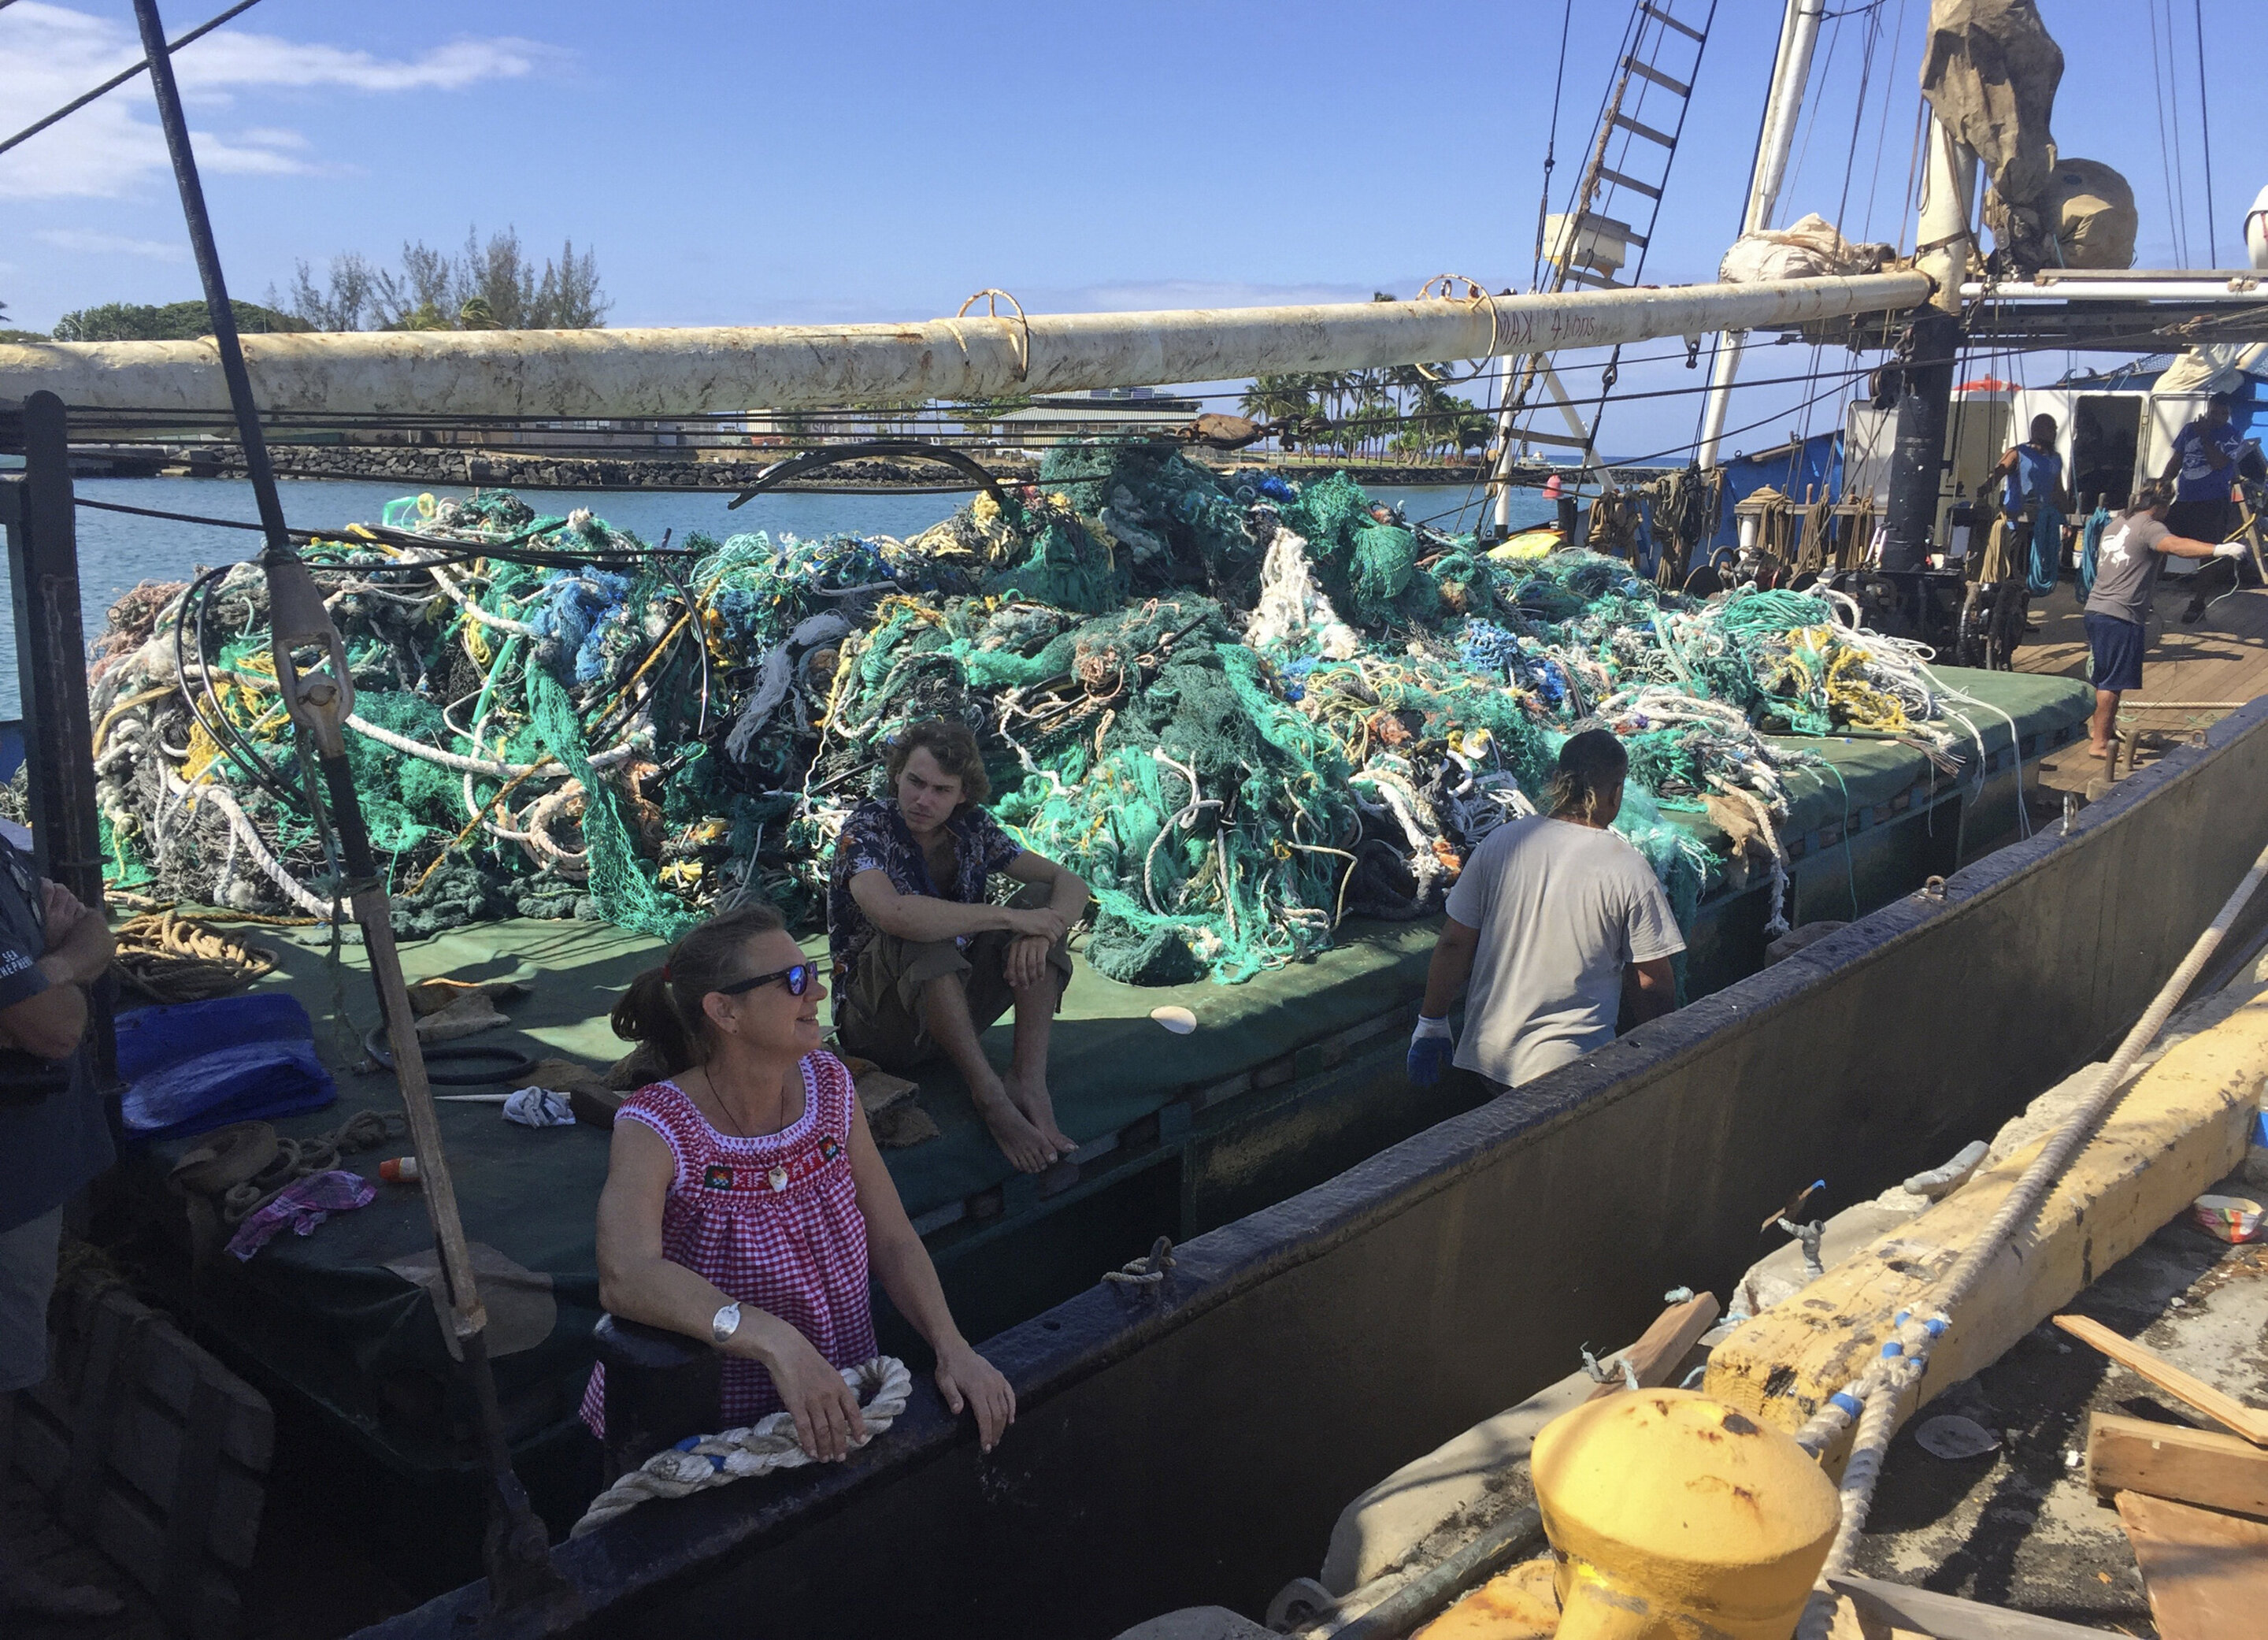 Almost 1,500 tonnes of netting waste creates headache for recycling and  fishing industries - ABC News